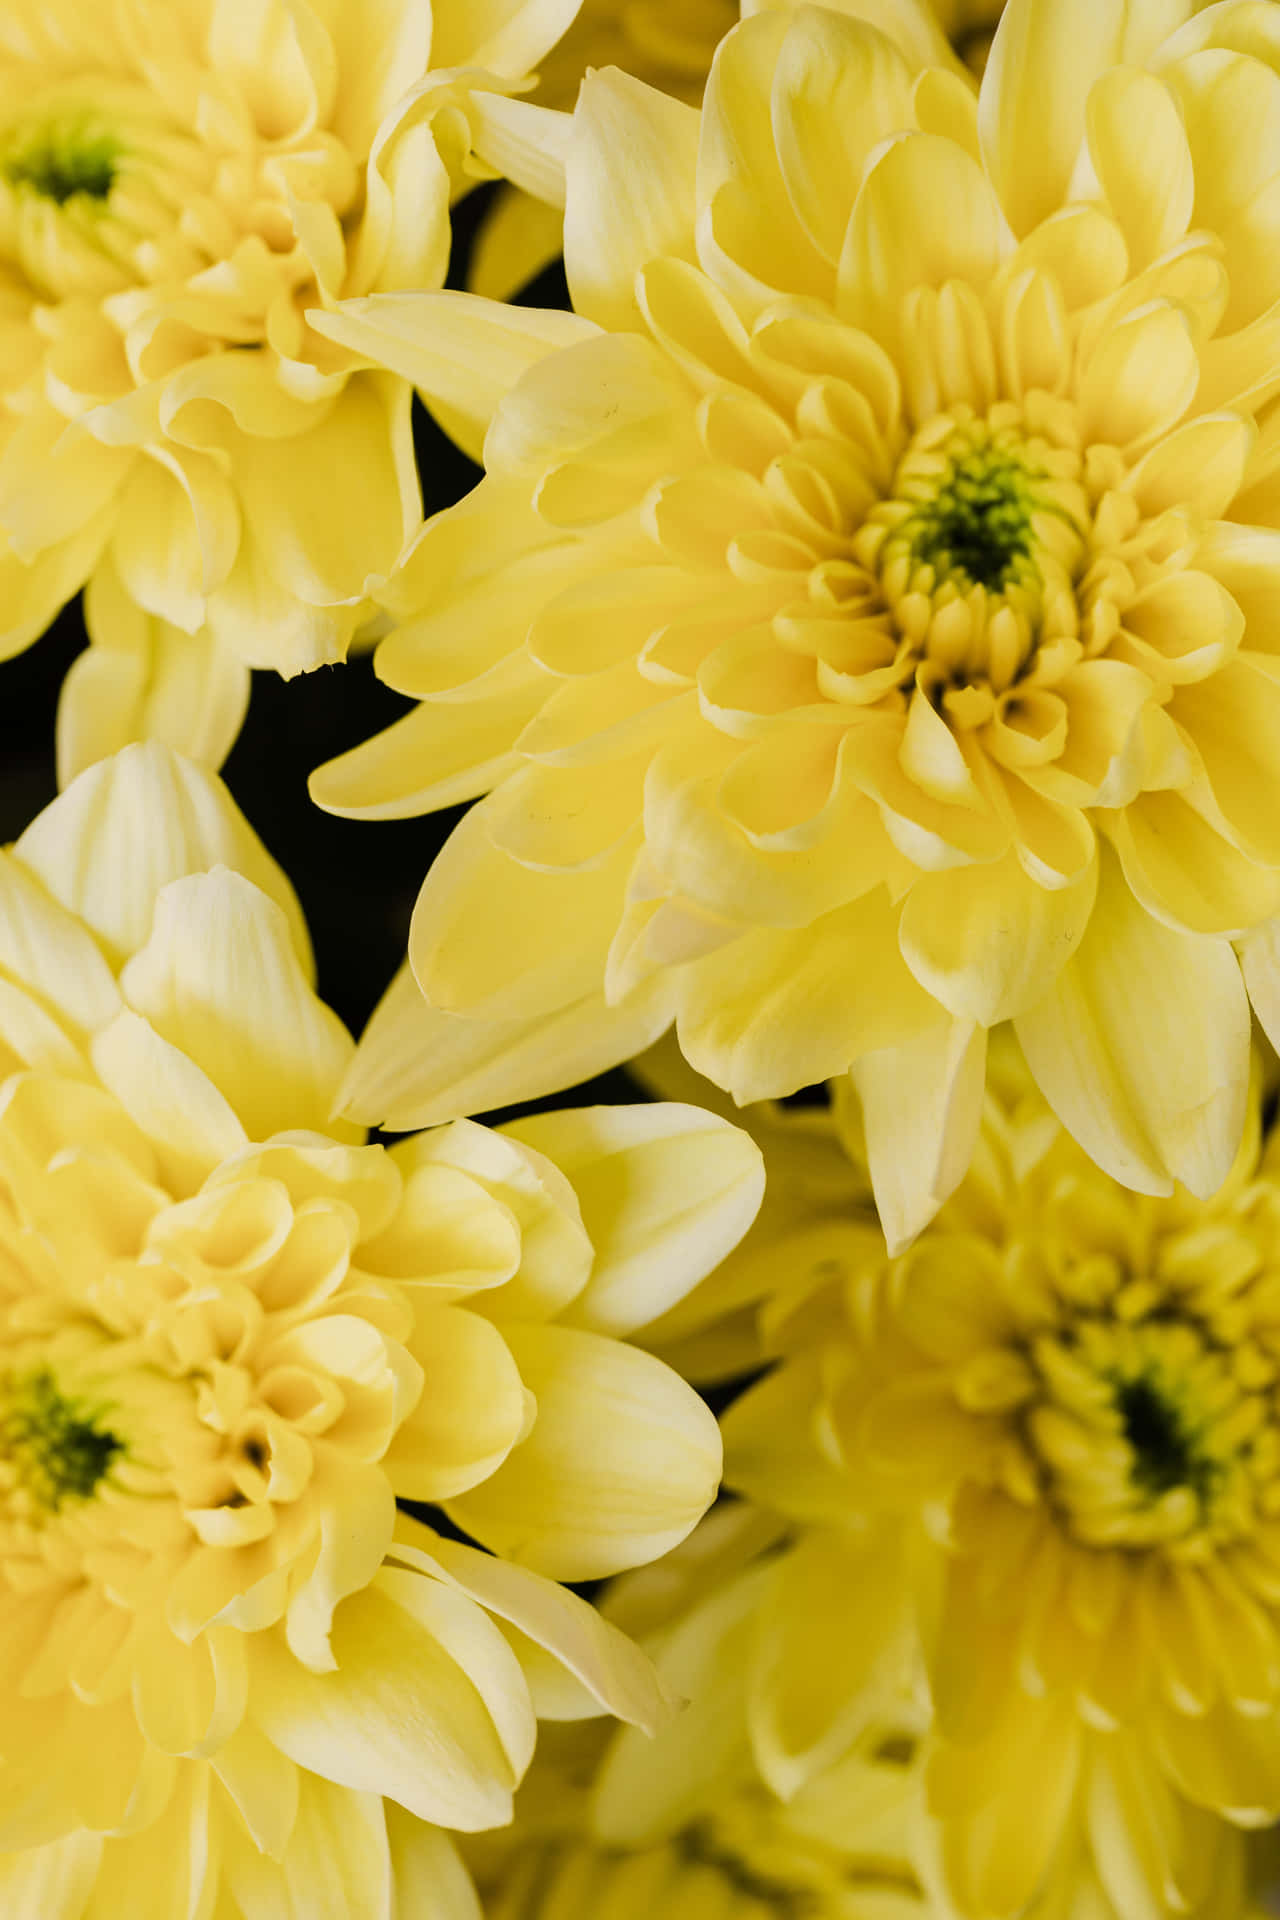 Vibrant yellow blooms bring life and joy to the garden. Wallpaper